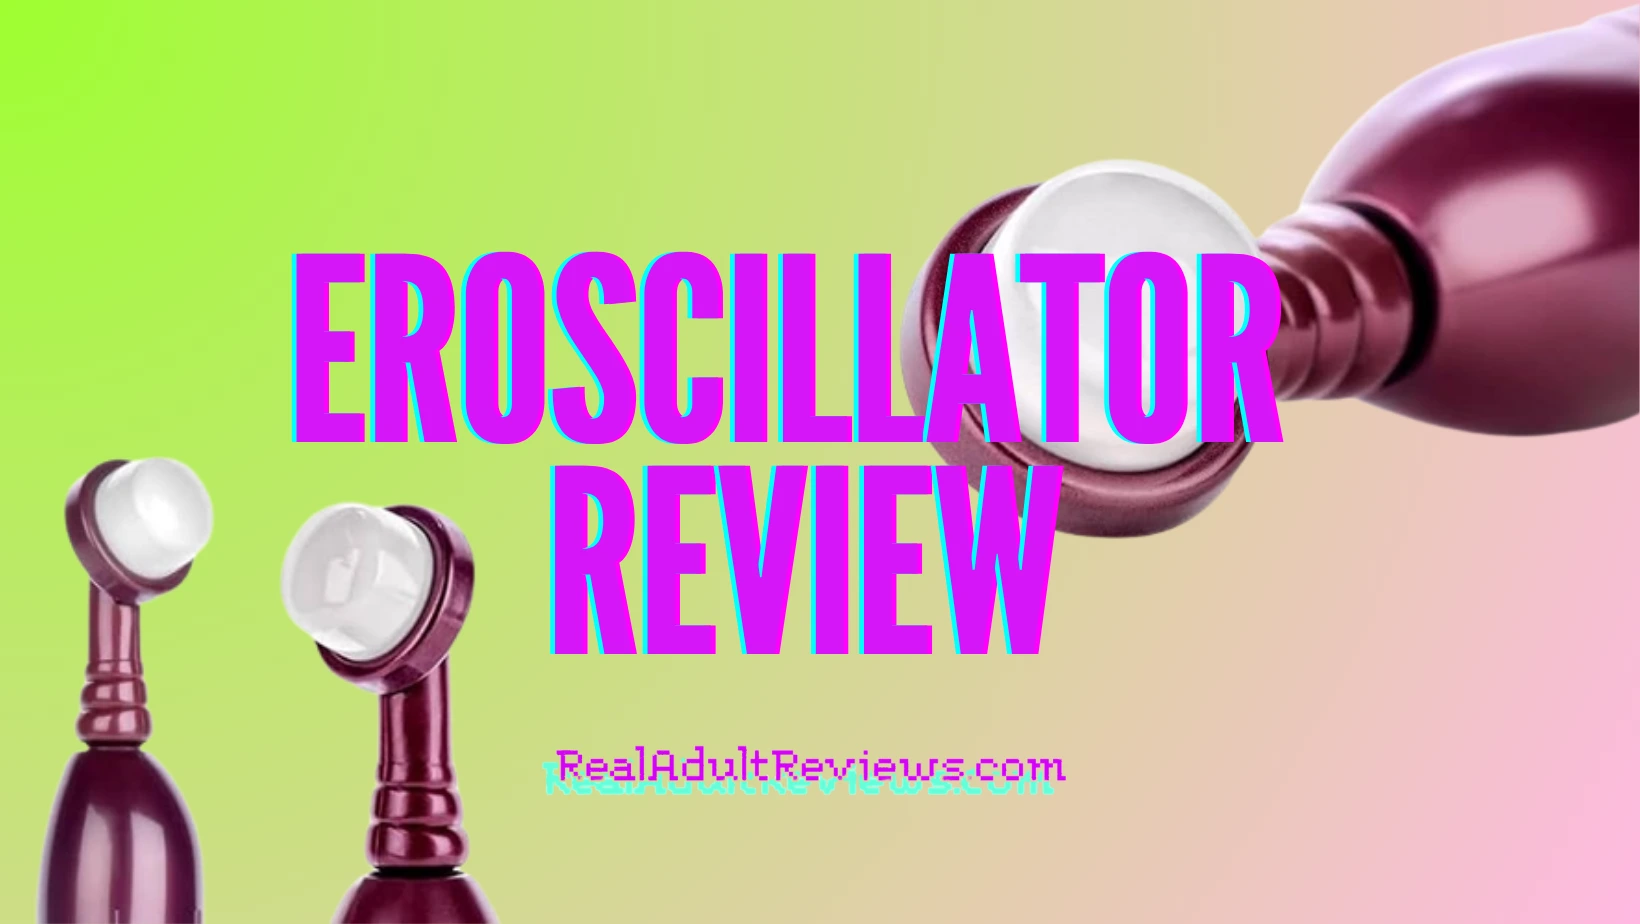 How to Stimulate Clitoris Without Vibration: Eroscillator Review.